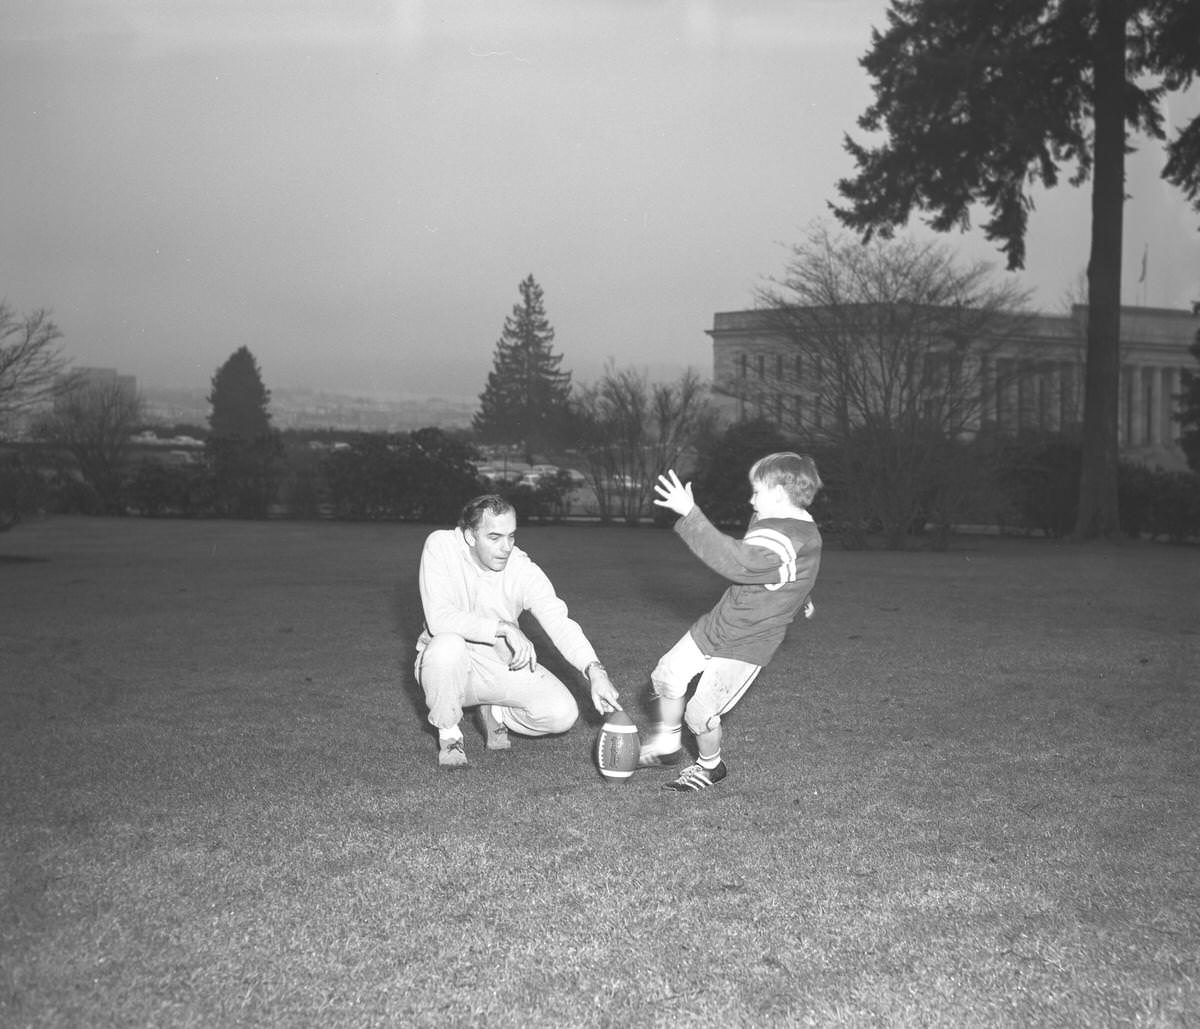 Evans and son playing football, 1969